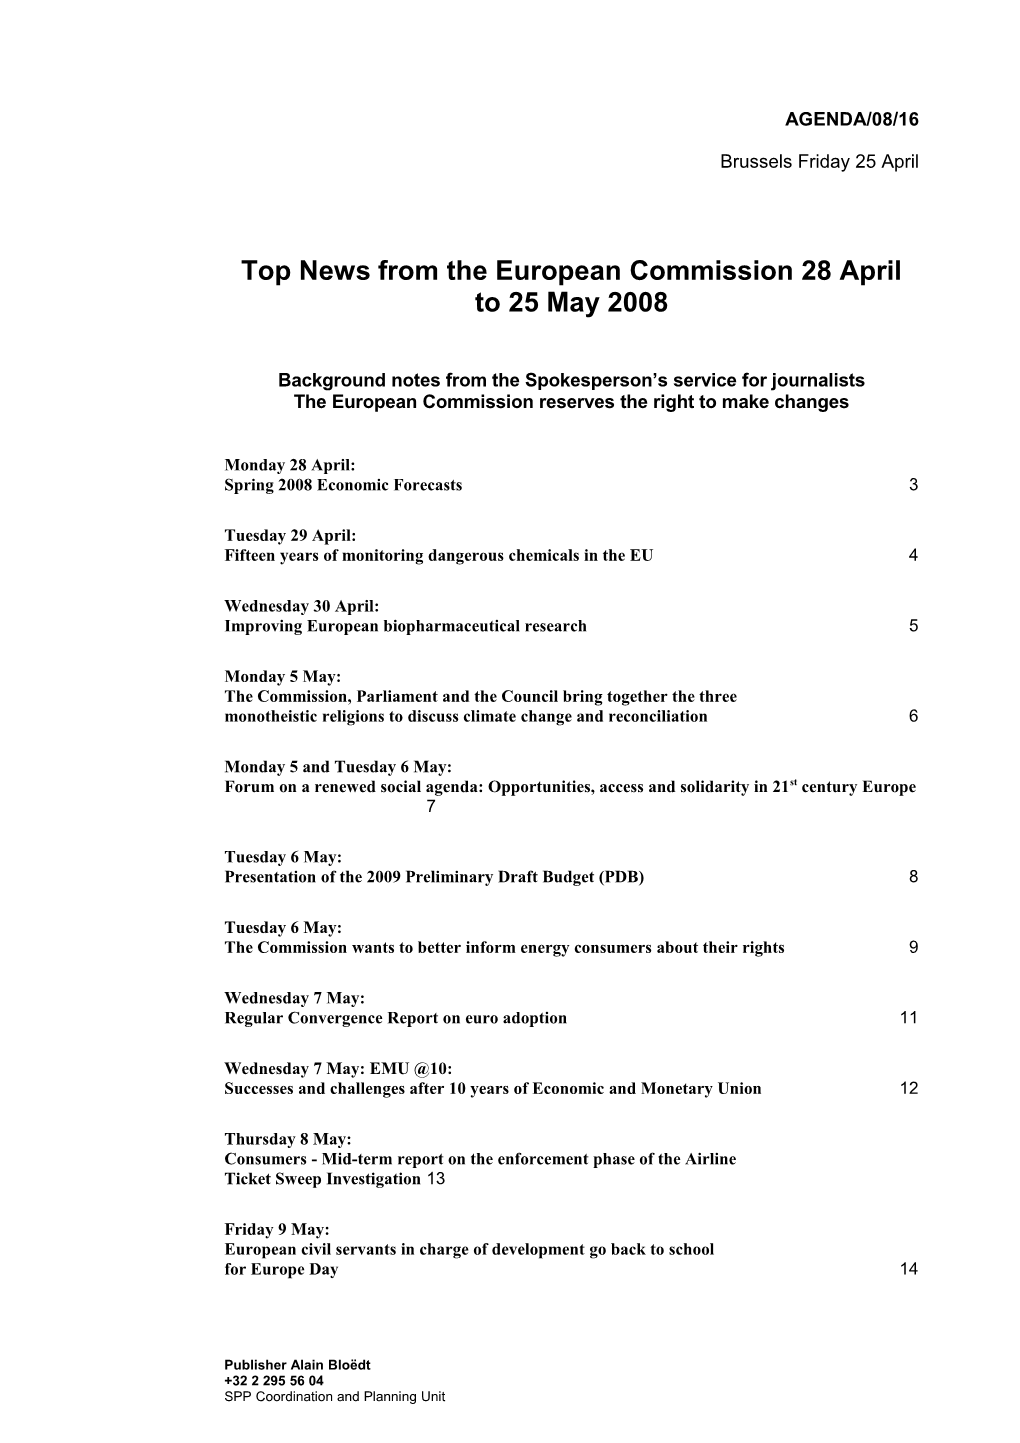 Top News from the European Commission28 April to 25 May 2008